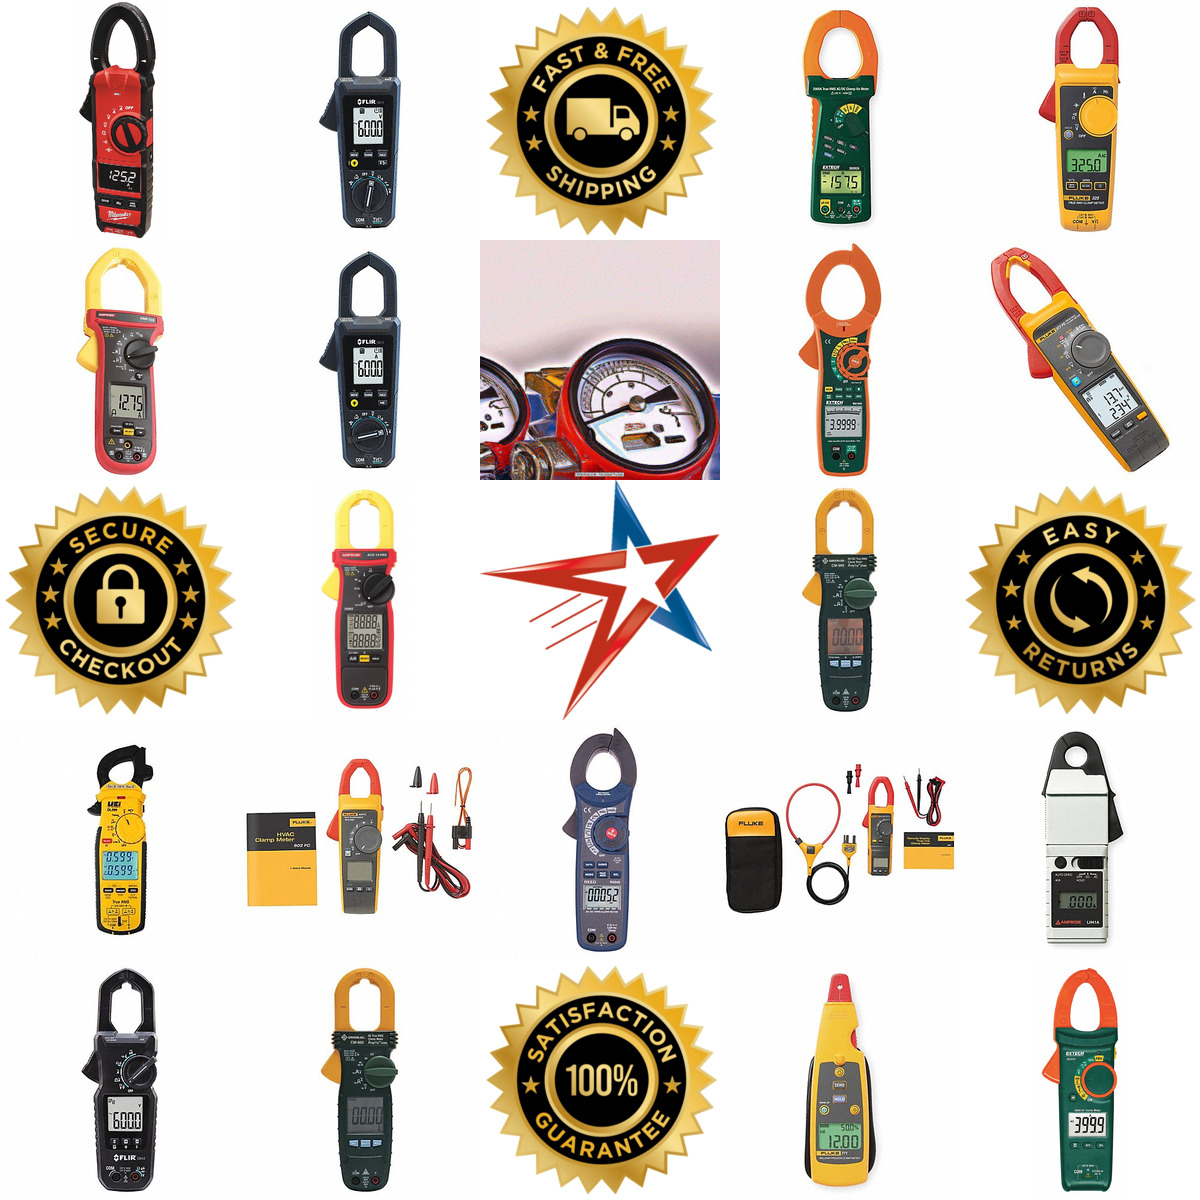 A selection of Digital Clamp Meters products on GoVets